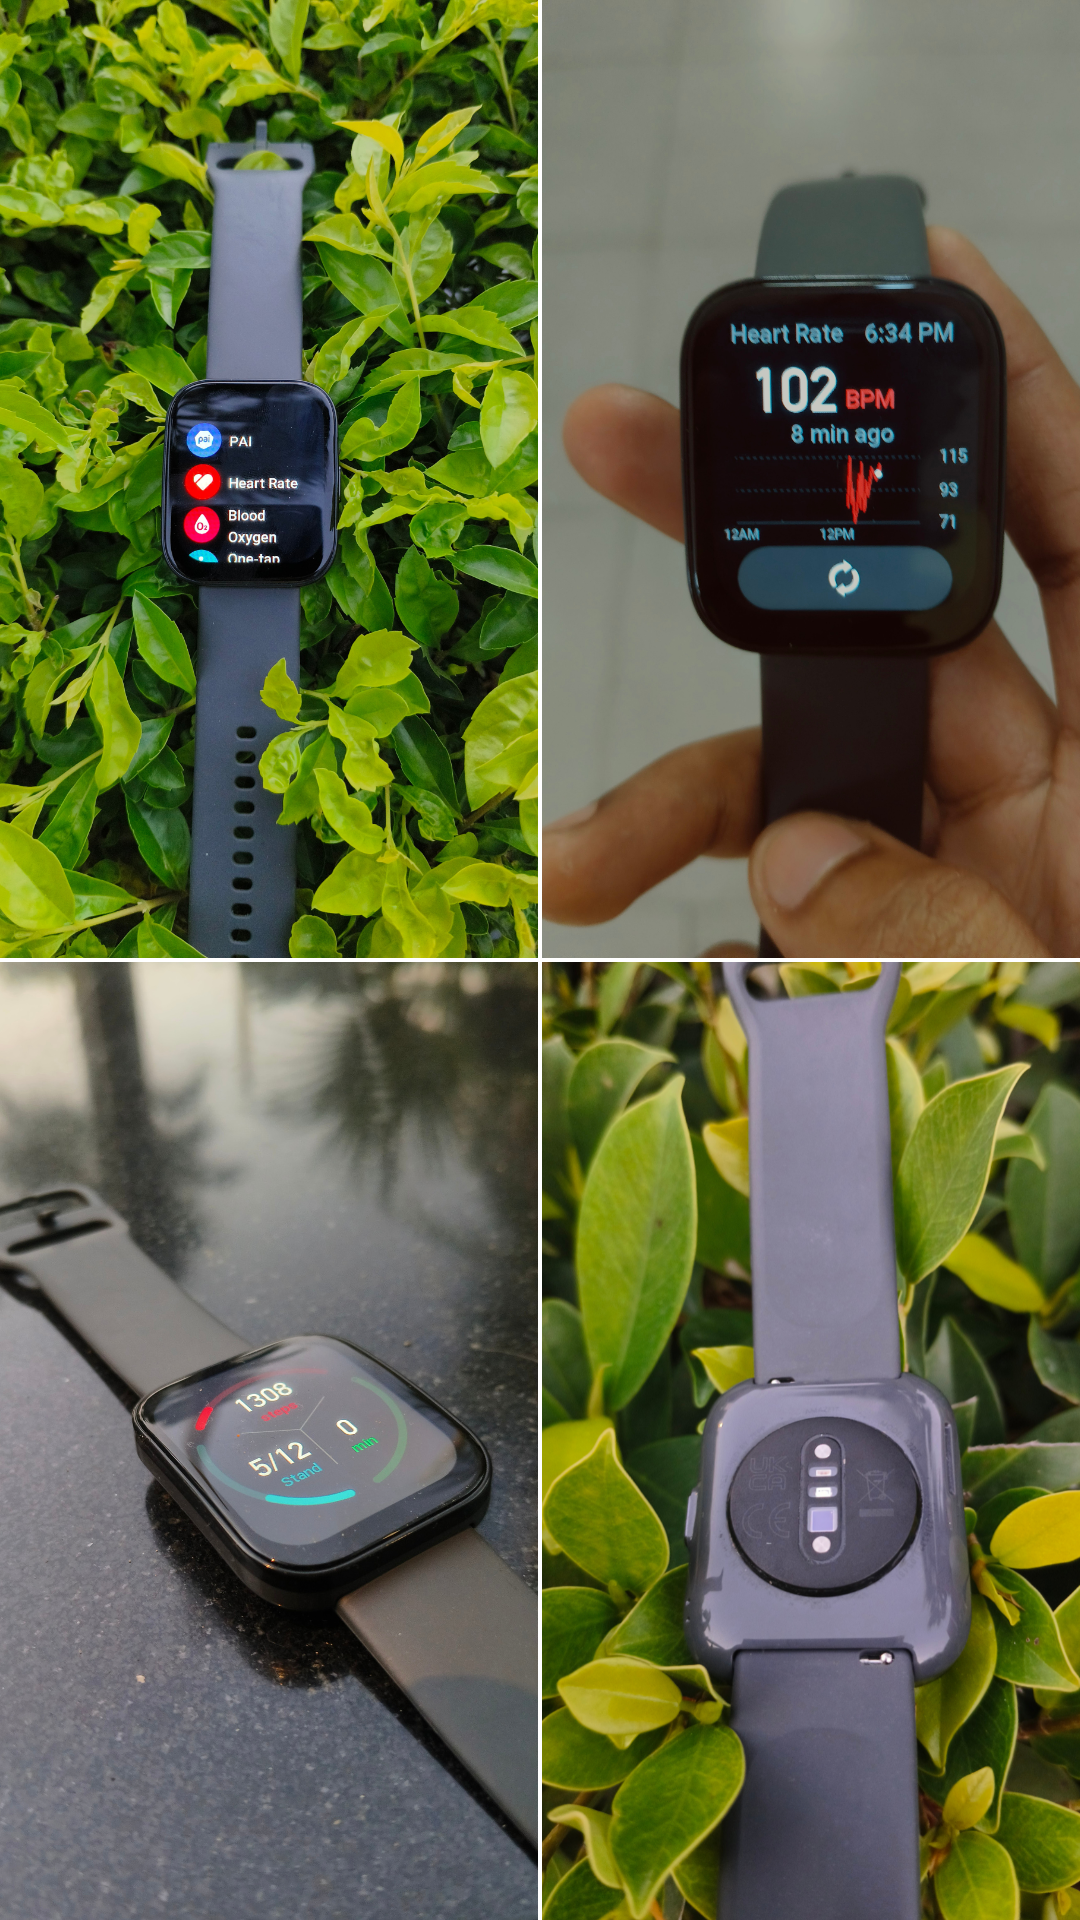 Amazfit Bip 5 smartwatch featuring 1.91-inch display launched with